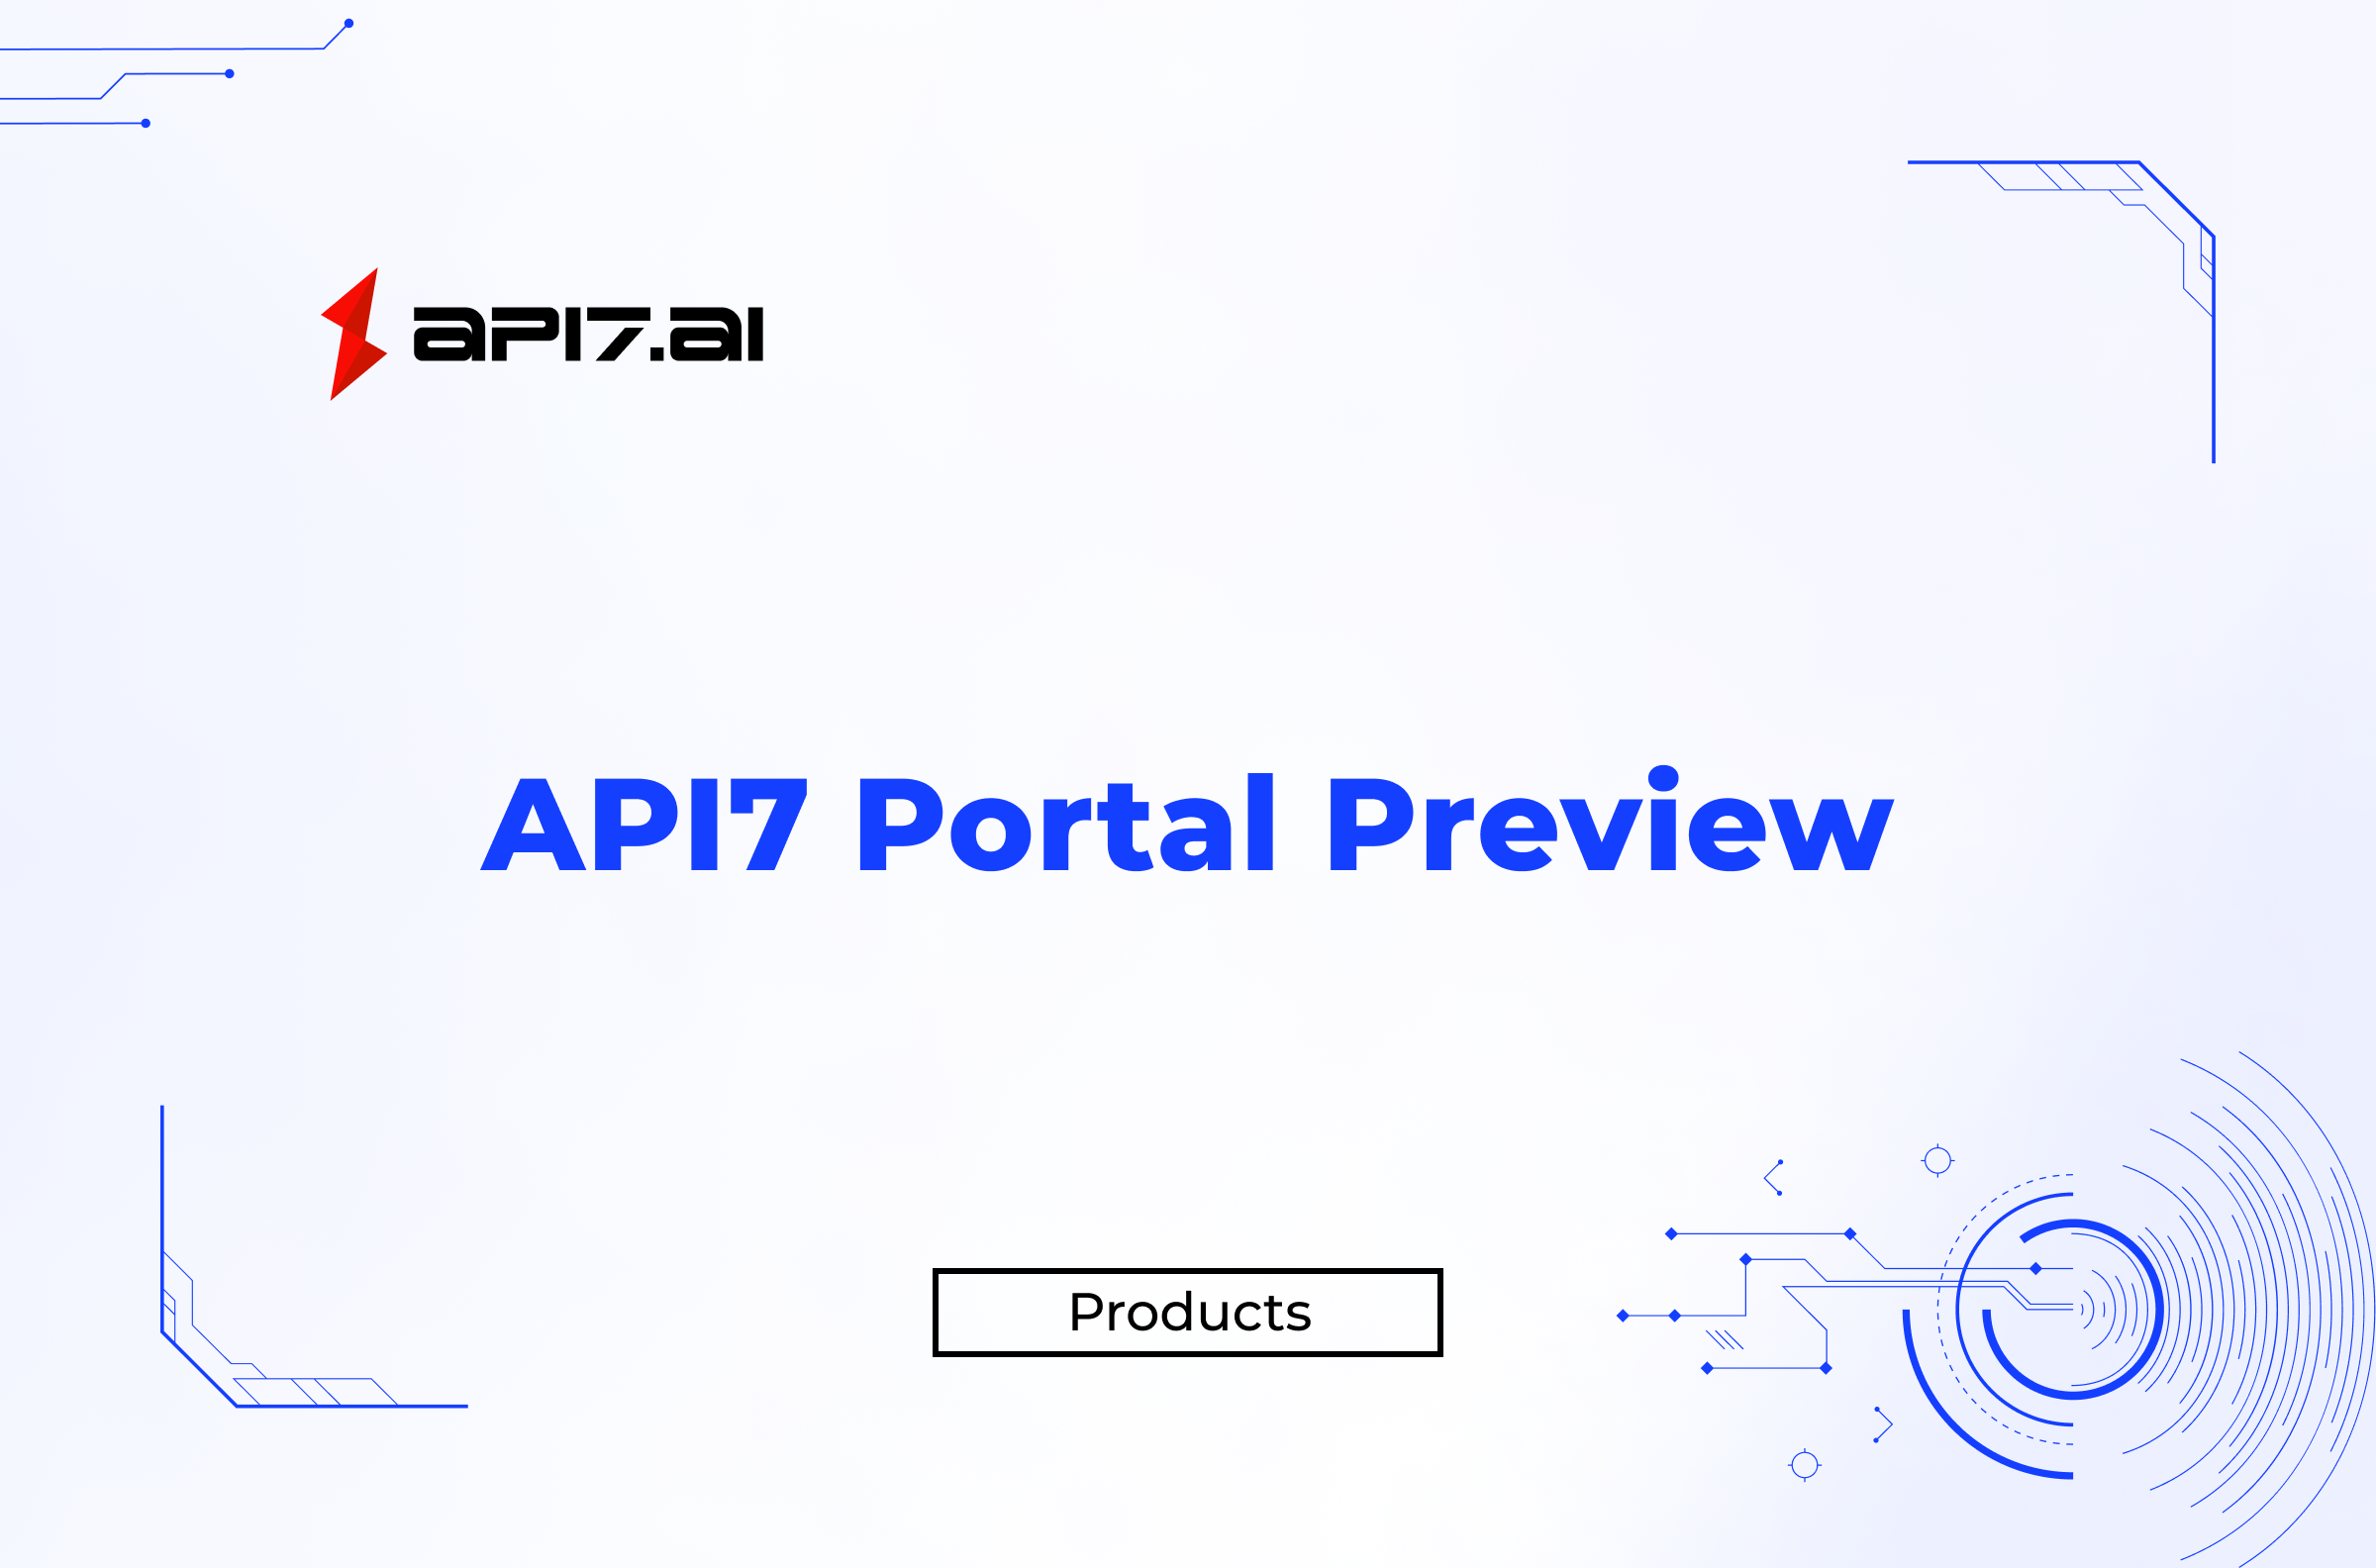 API7 Portal Preview: Empowering API Development with All-in-One Solutions